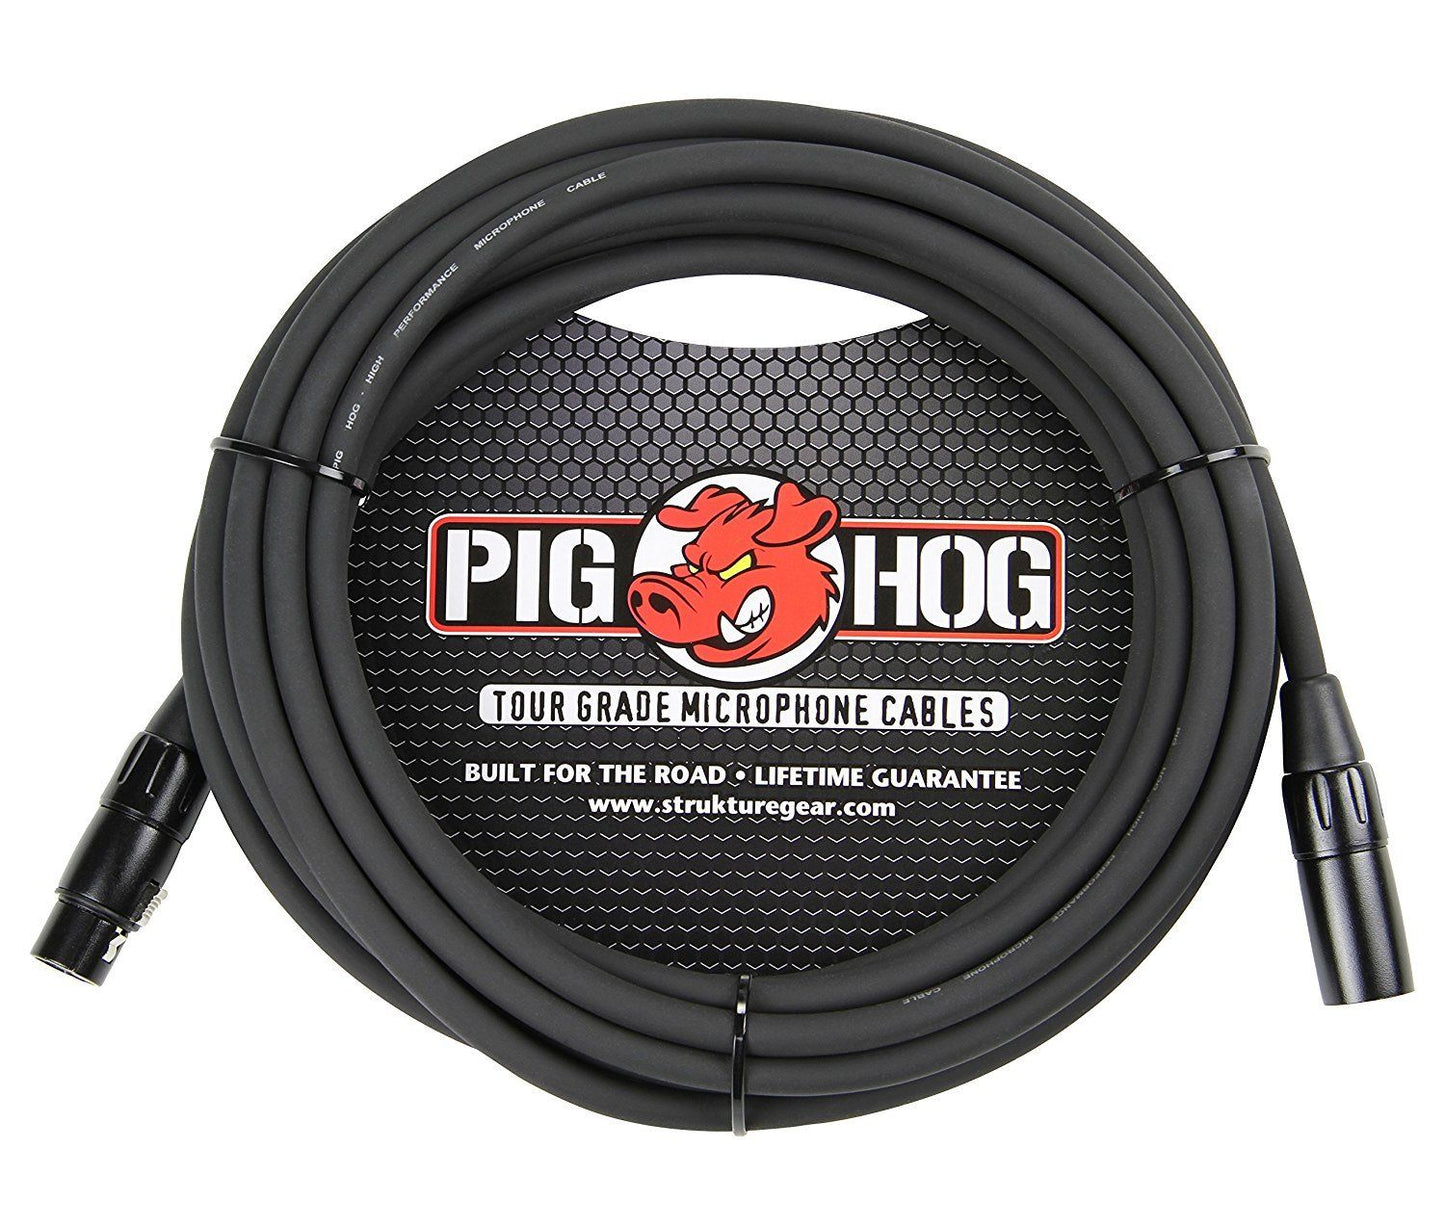 Pig Hog PHM25 XLR High Performance 8mm Microphone Cable, 25 Ft